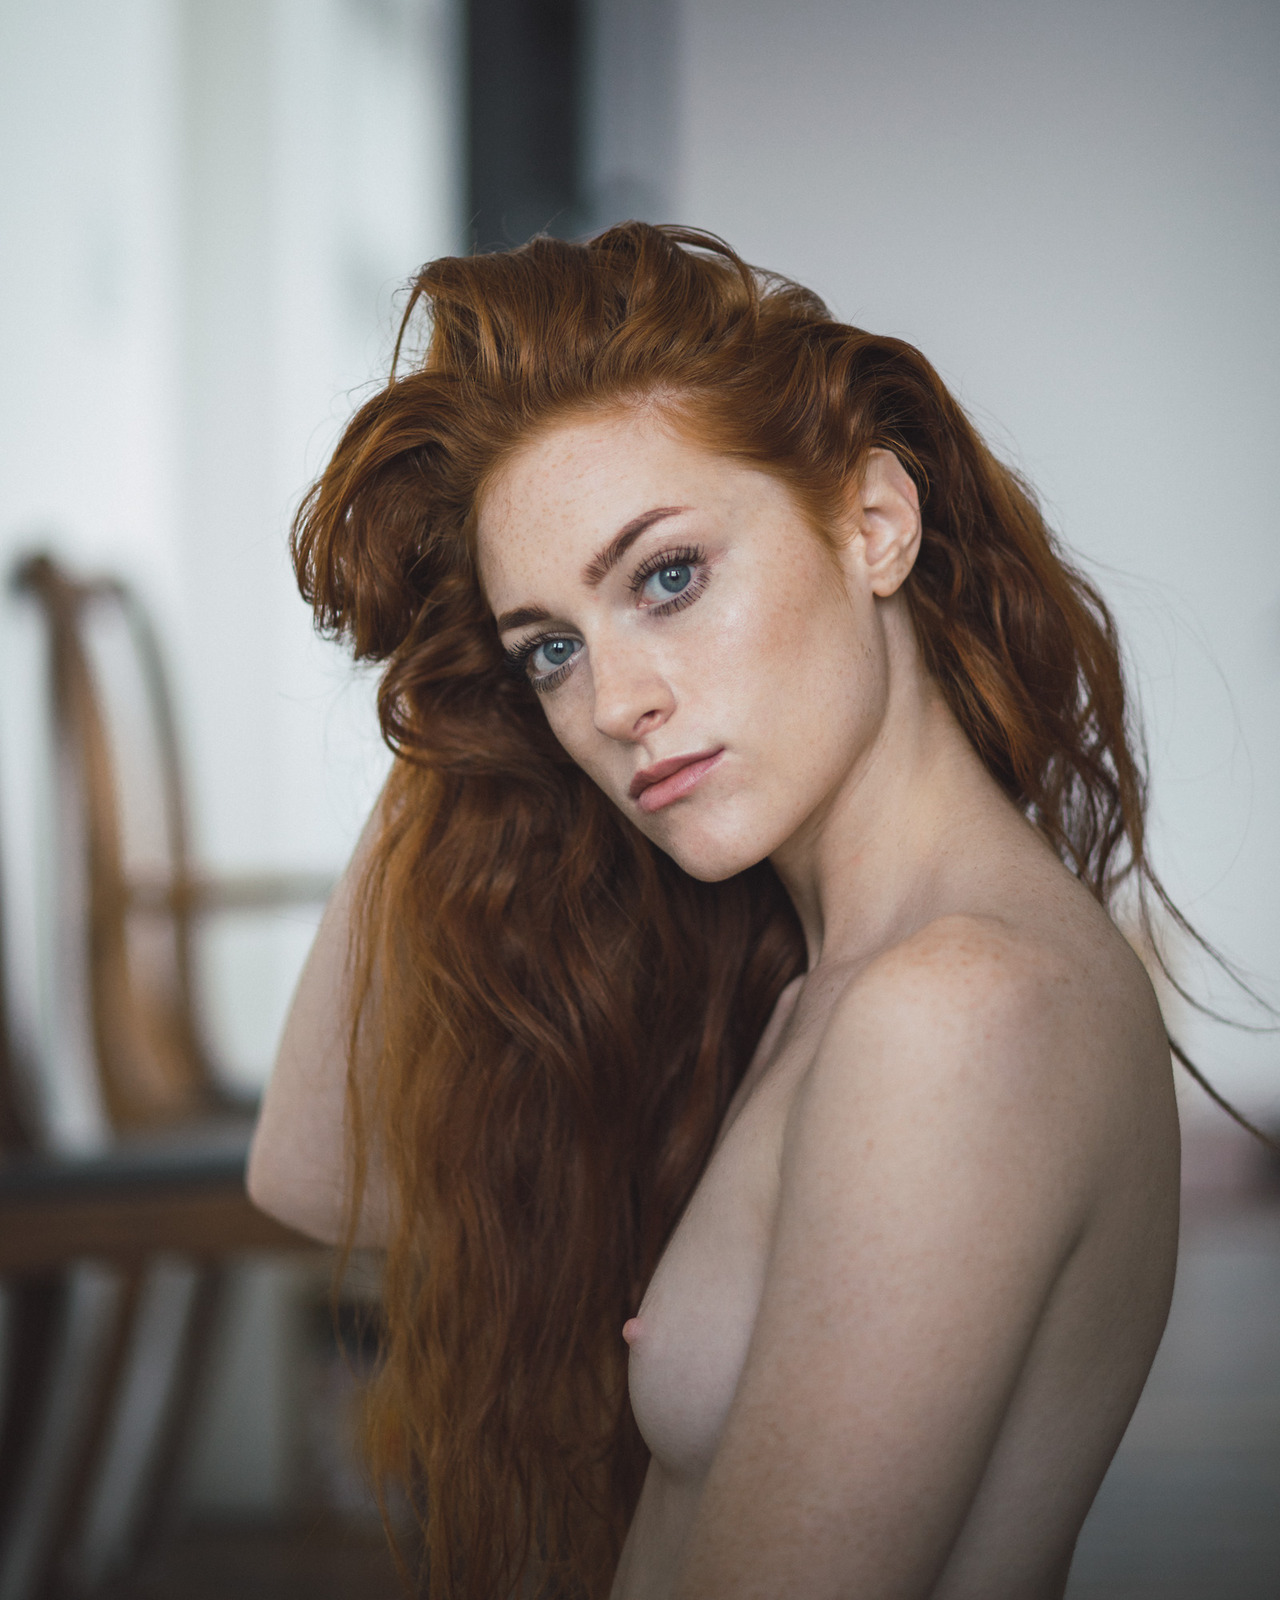 Naked redhead photo galleries